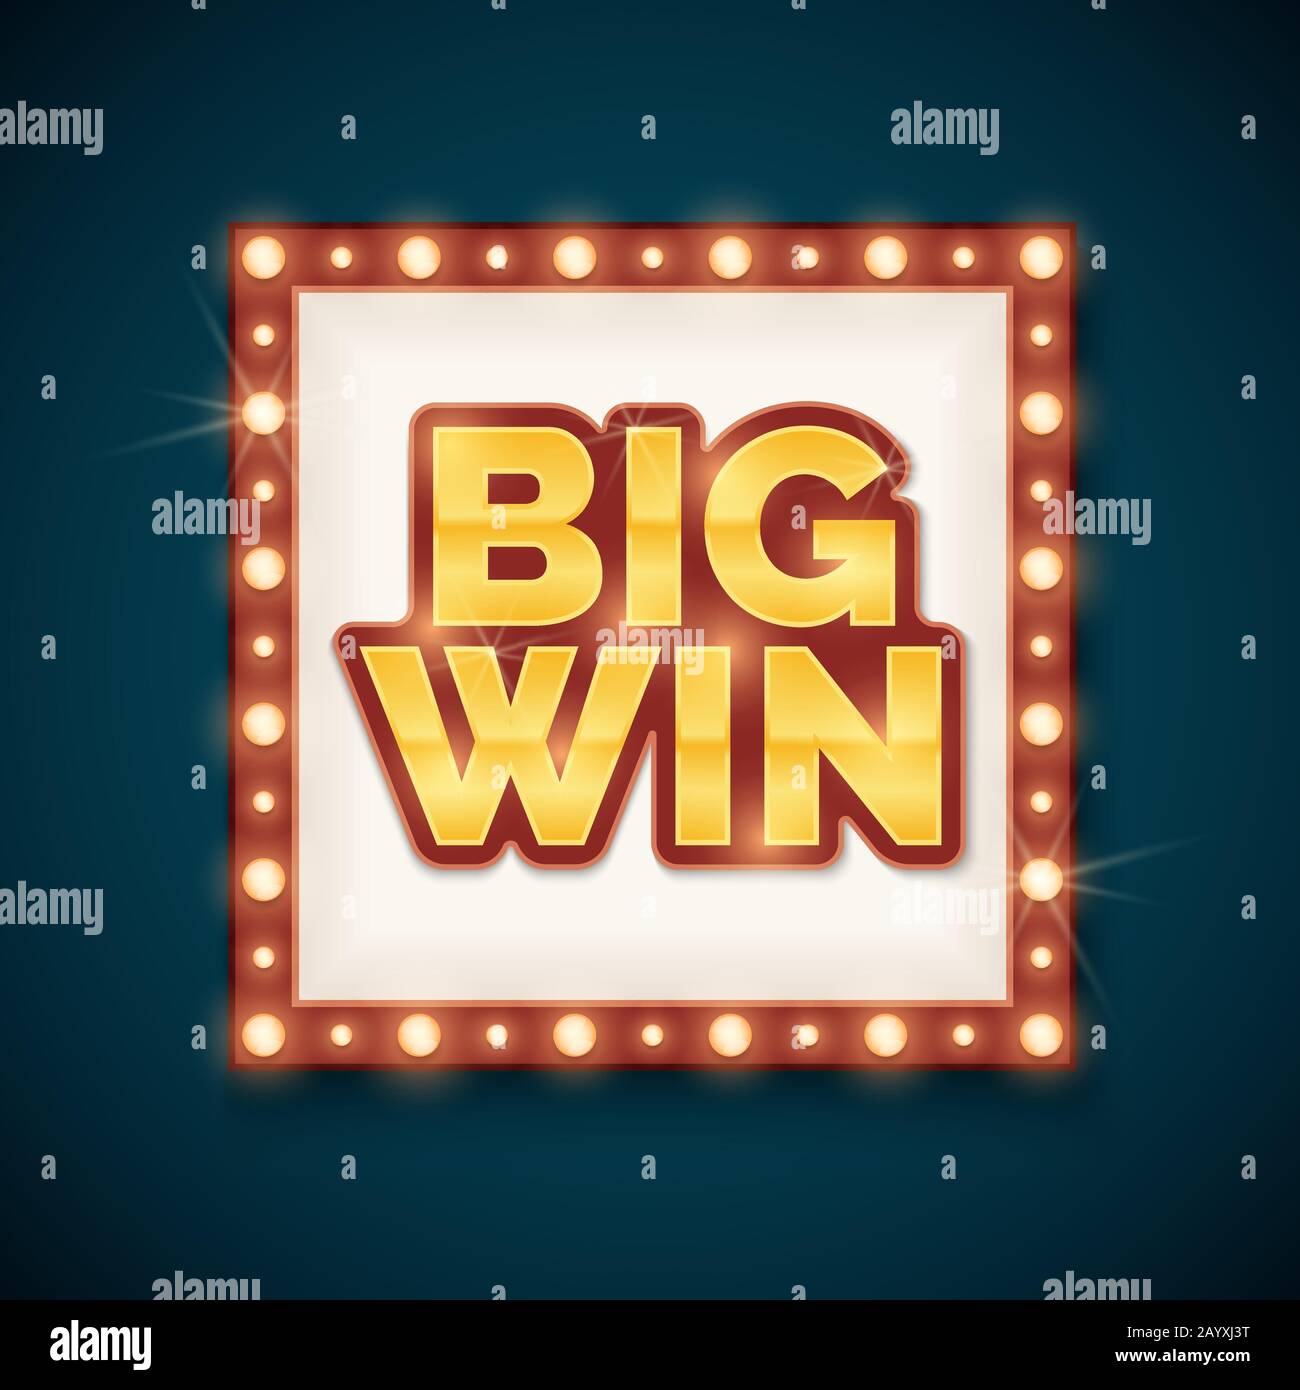 Big win banner with glowing lamps on frame. Template for casino and billboard, vector illustration Stock Vector